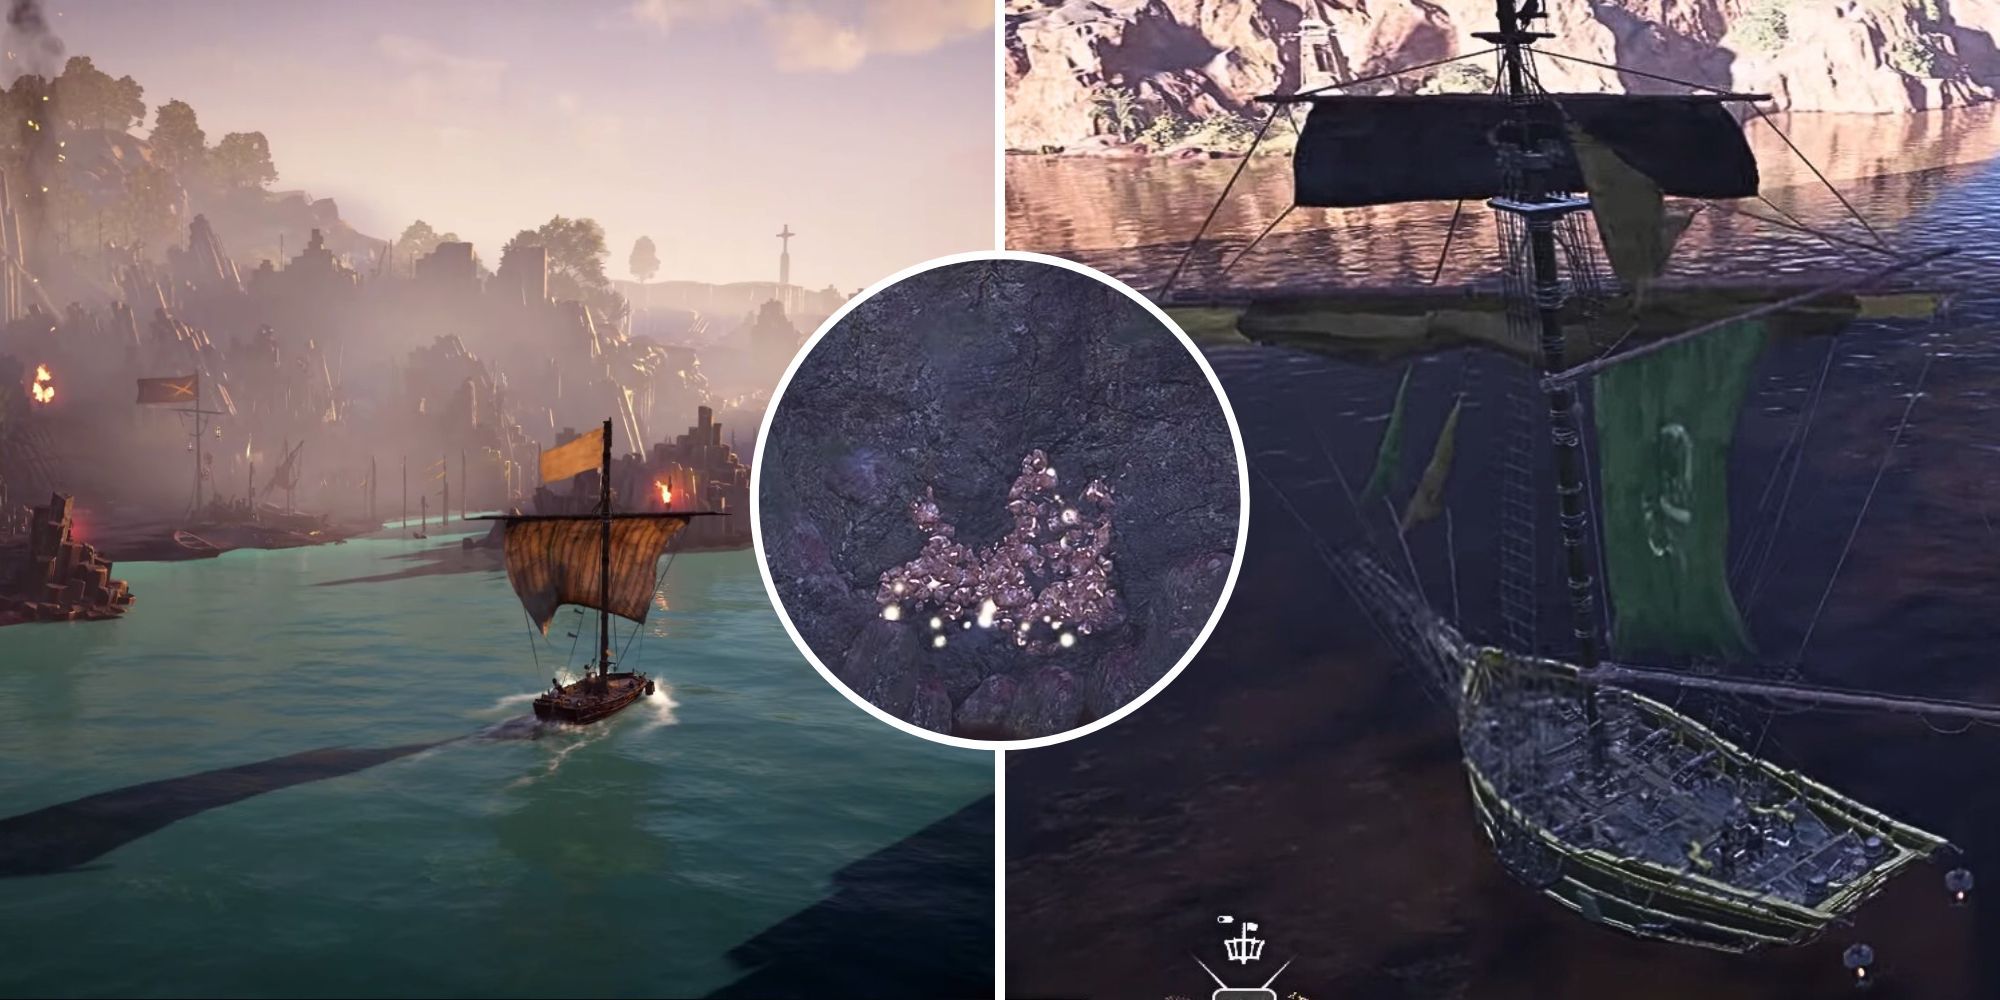 The Skull And Bones character found copper while sailing the seas.